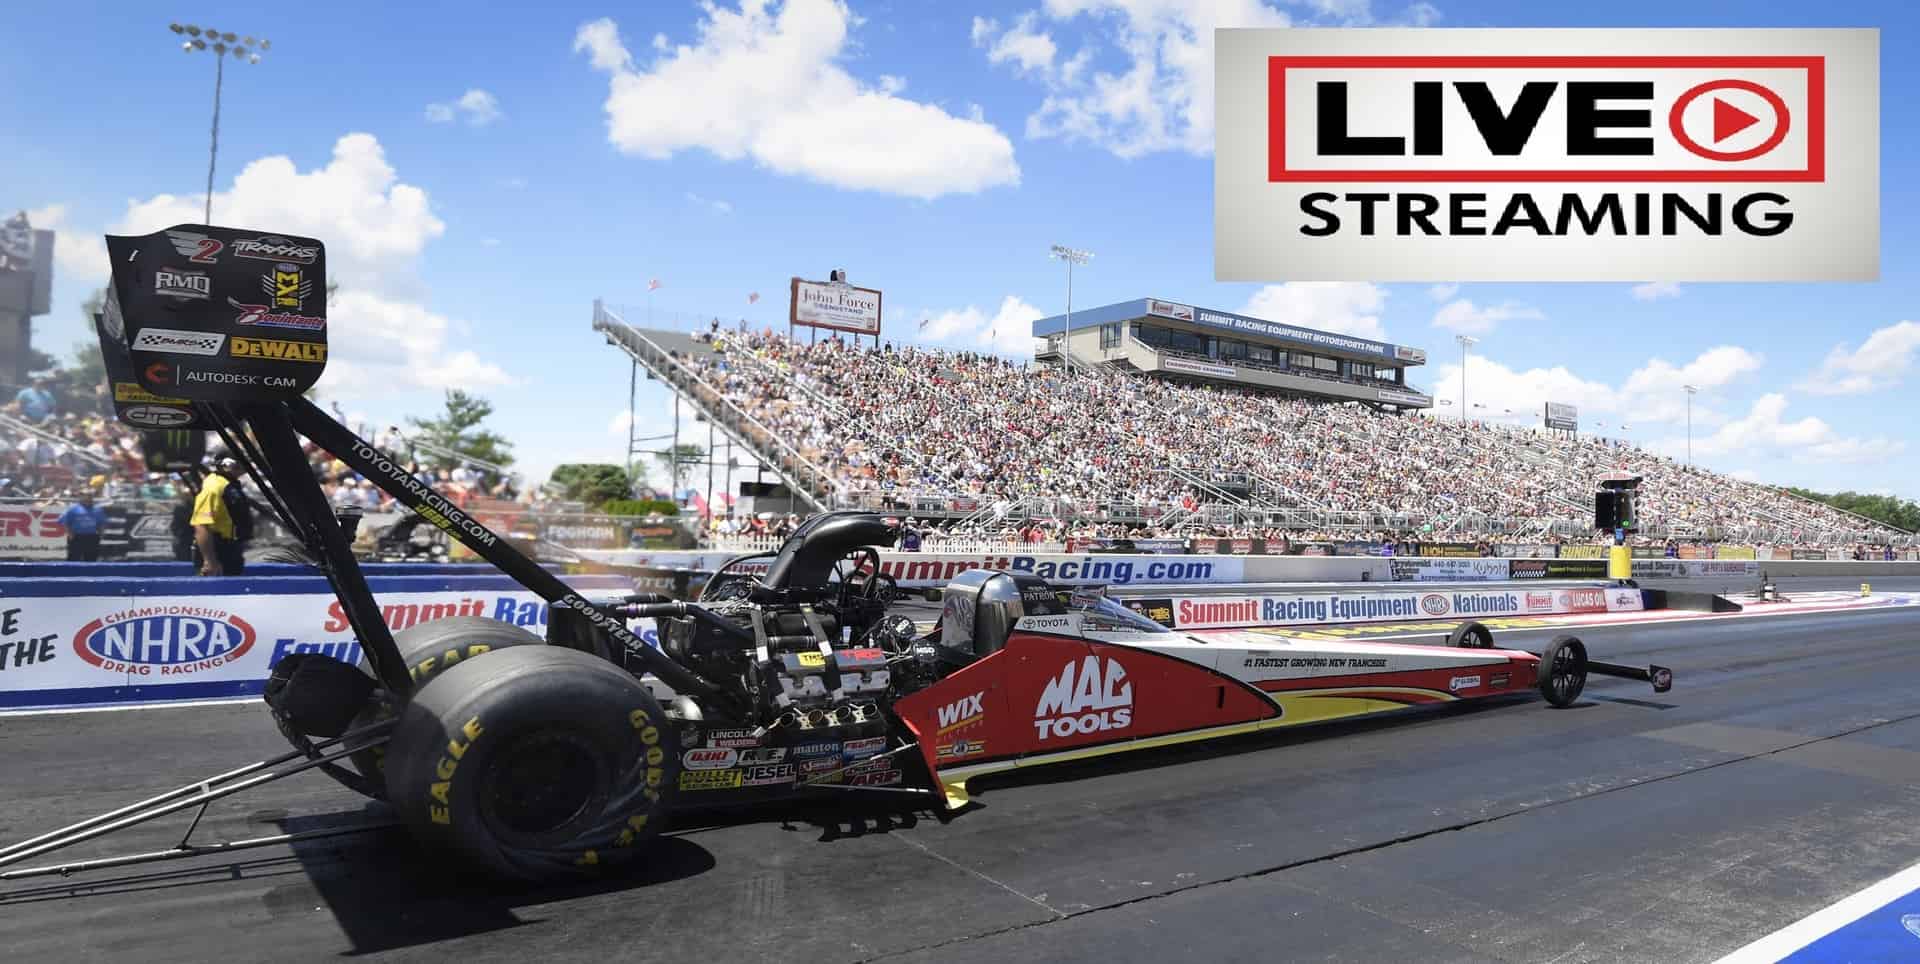 performance-us-nationals-at-lucas-oil-raceway-live-streaming